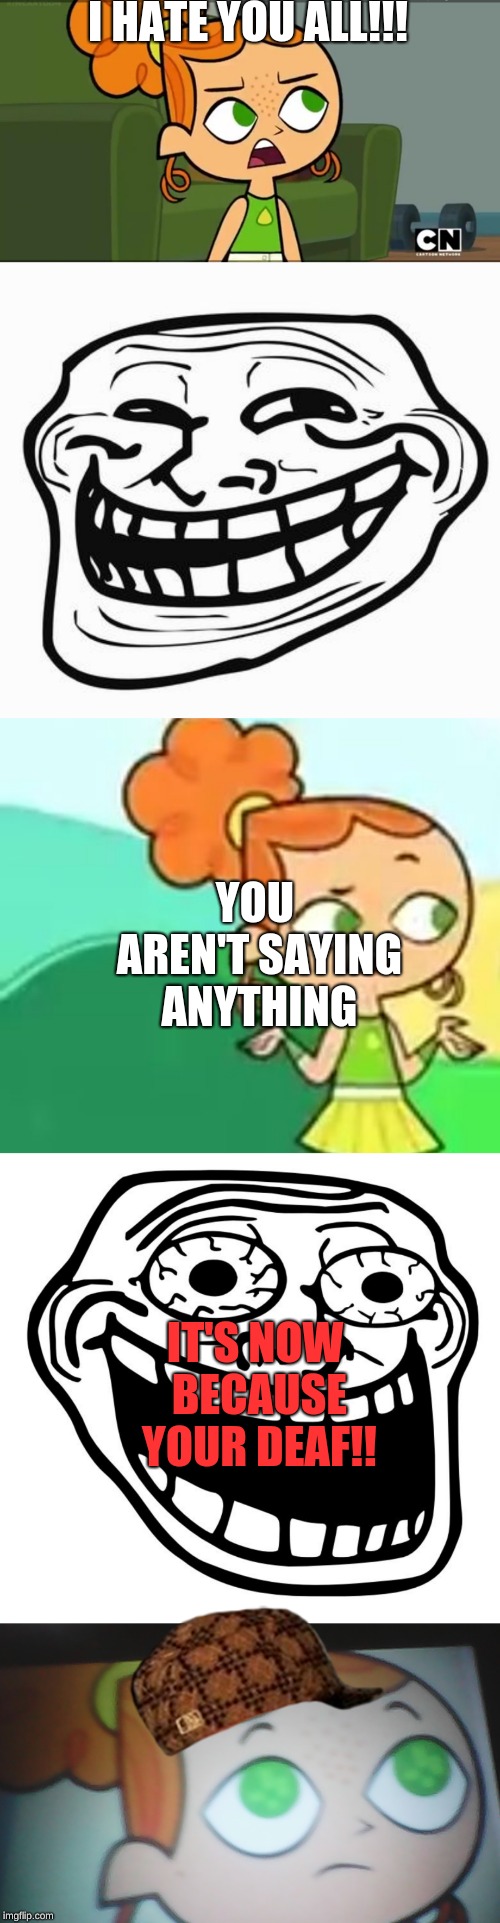 I HATE YOU ALL!!! YOU AREN'T SAYING ANYTHING; IT'S NOW BECAUSE YOUR DEAF!! | image tagged in trollface,crazy trollface,first world problems izzy,confession izzy,how was i supposed to know izzy | made w/ Imgflip meme maker